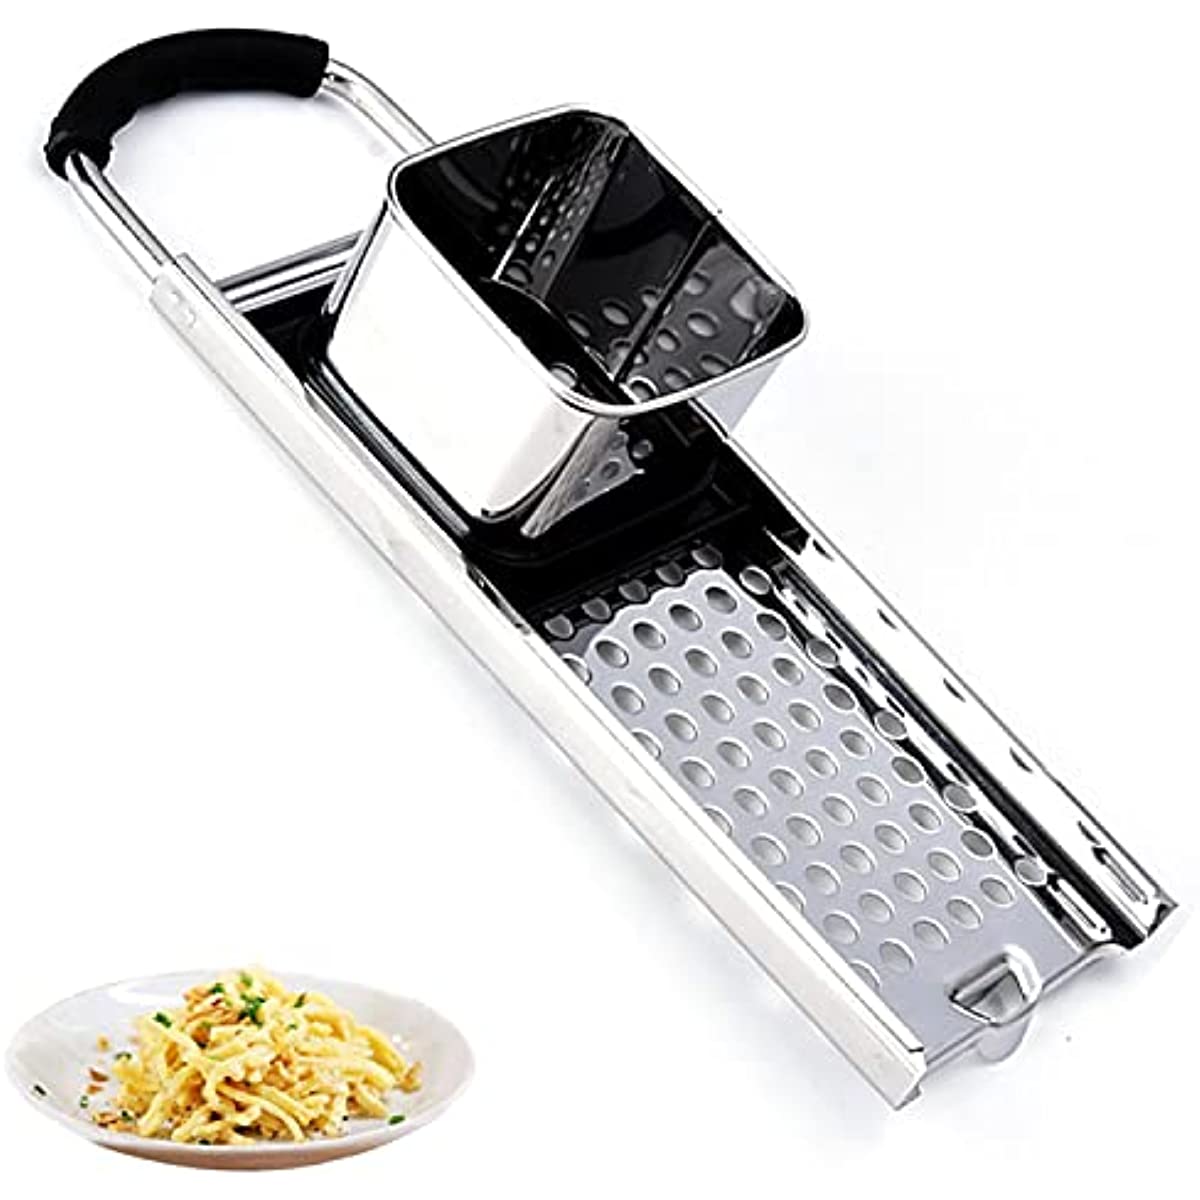 1pc comfortable stainless steel spaetzle maker with safety pusher and rubber grip handle perfect for making noodles and dumplings